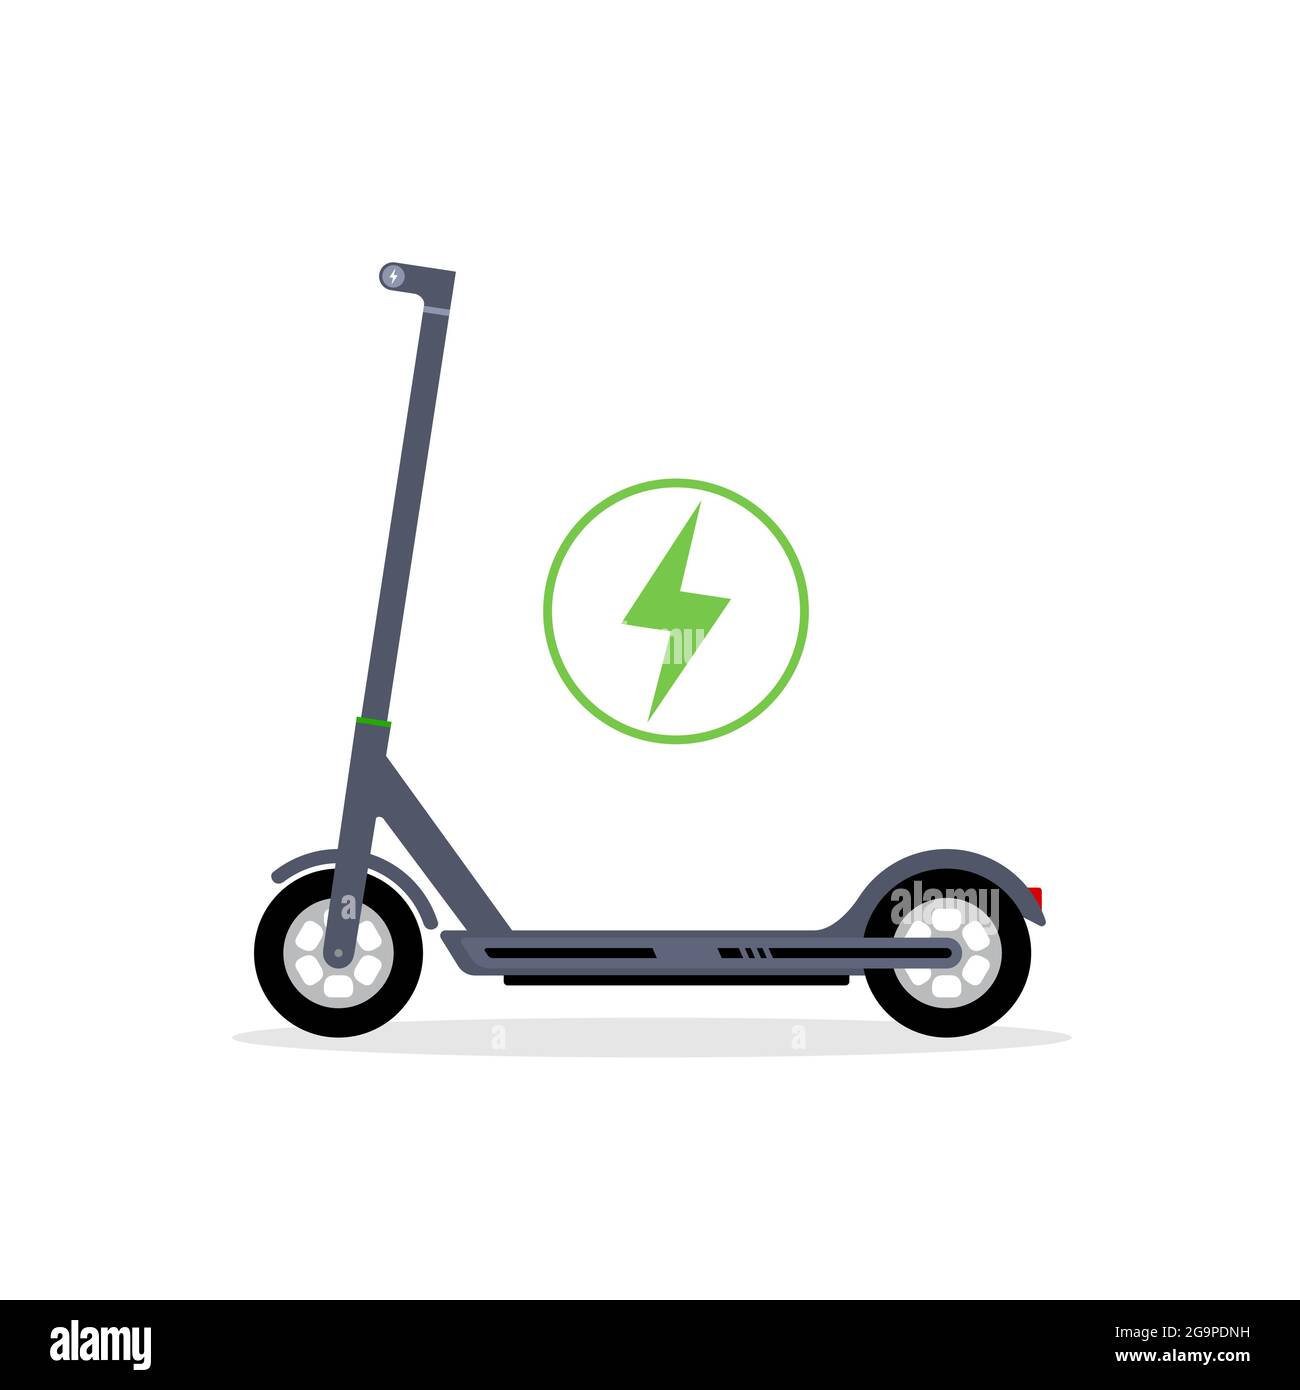 Electric scooter vector icon logo. Bicycle electric scooter silhouette charge design Stock Vector